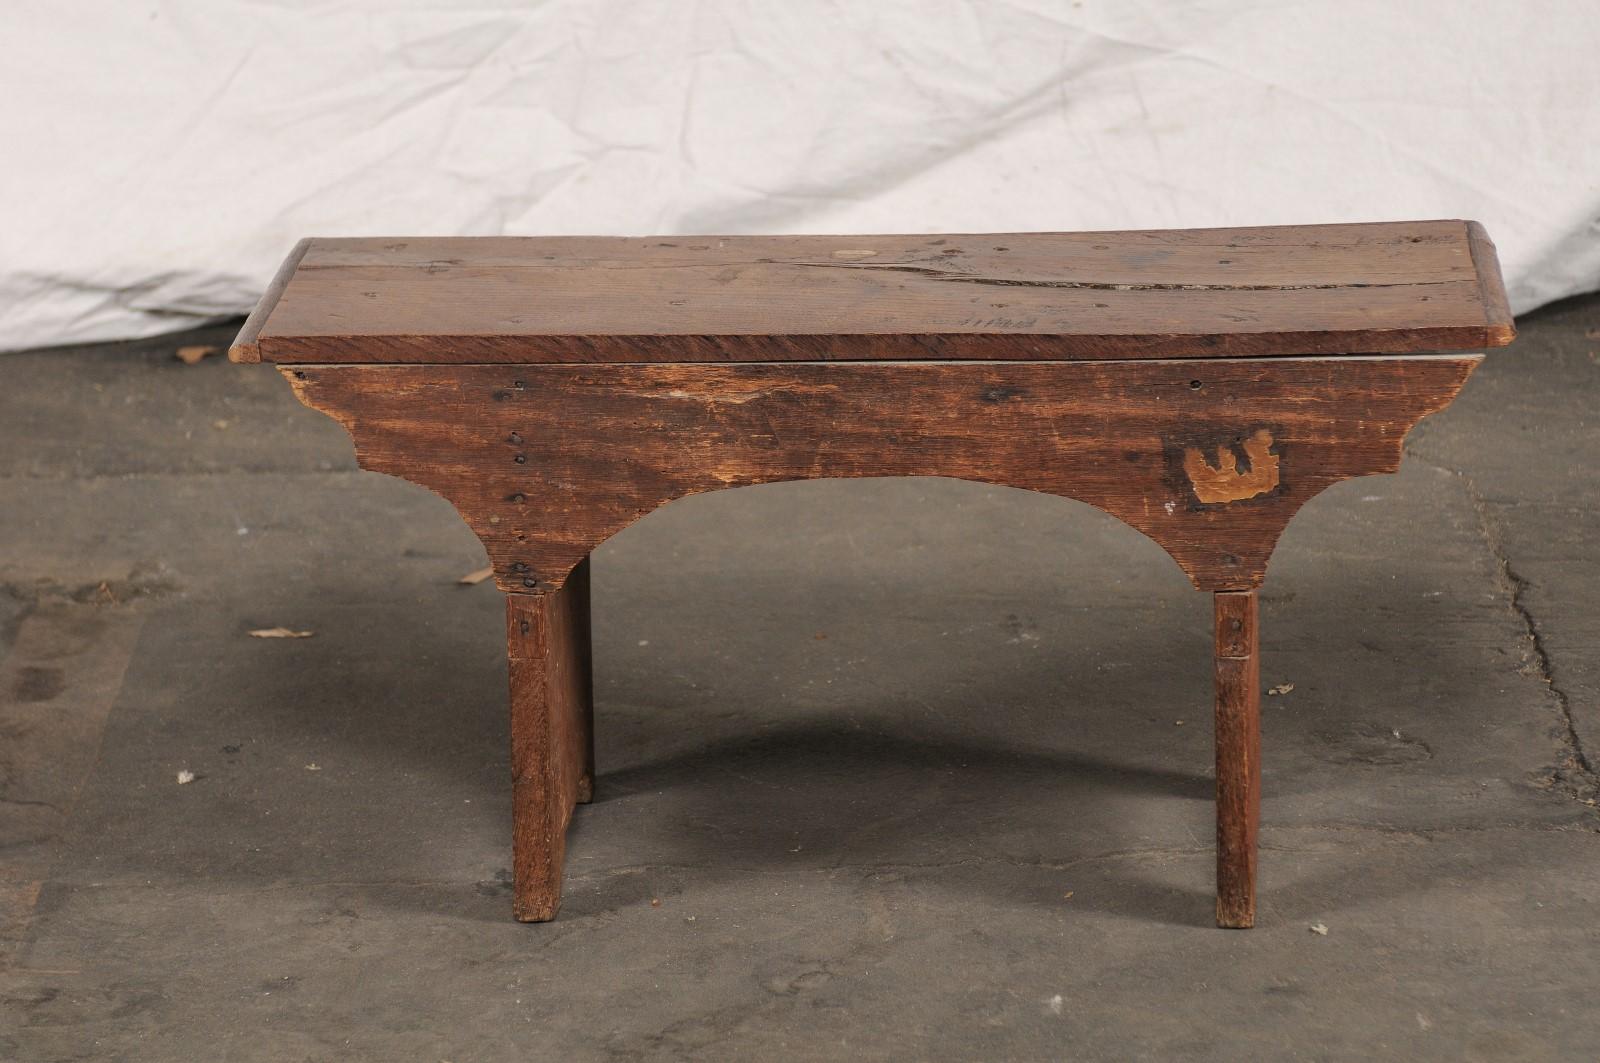 20th Century Continental Walnut Bench with Reticulated Carved Front, Labeled 3